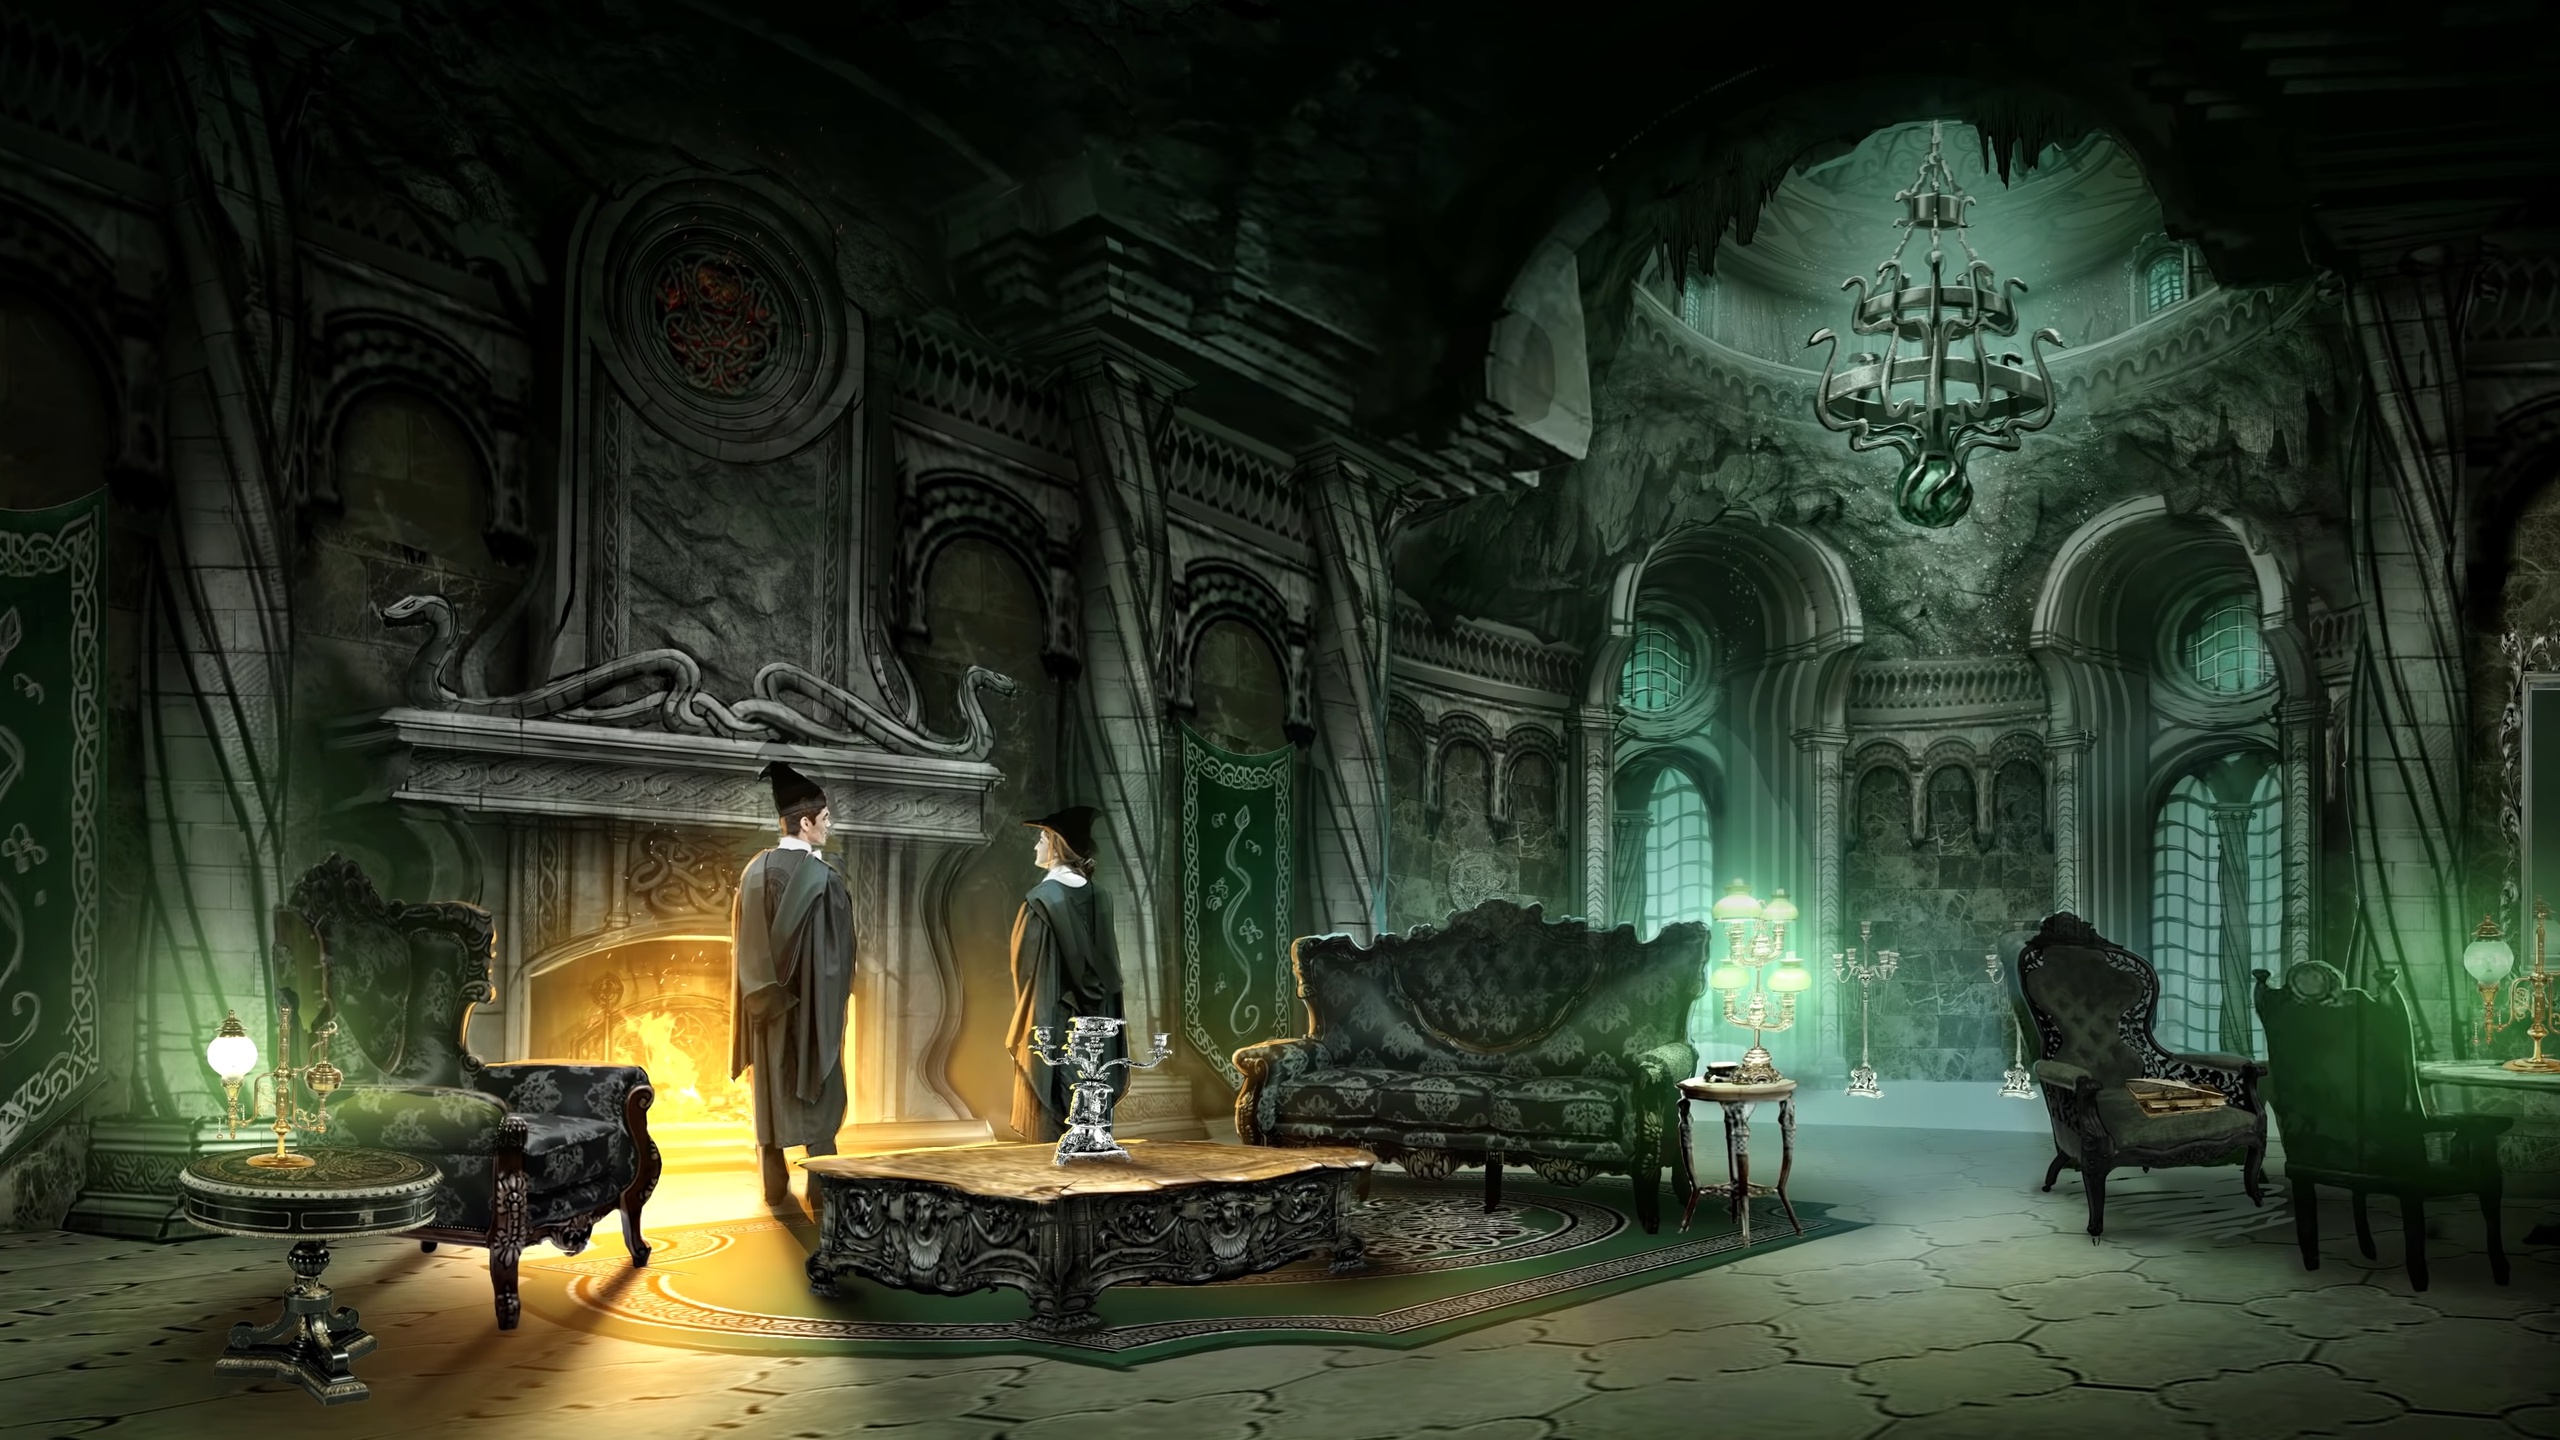 10+ Slytherin (Harry Potter) HD Wallpapers and Backgrounds